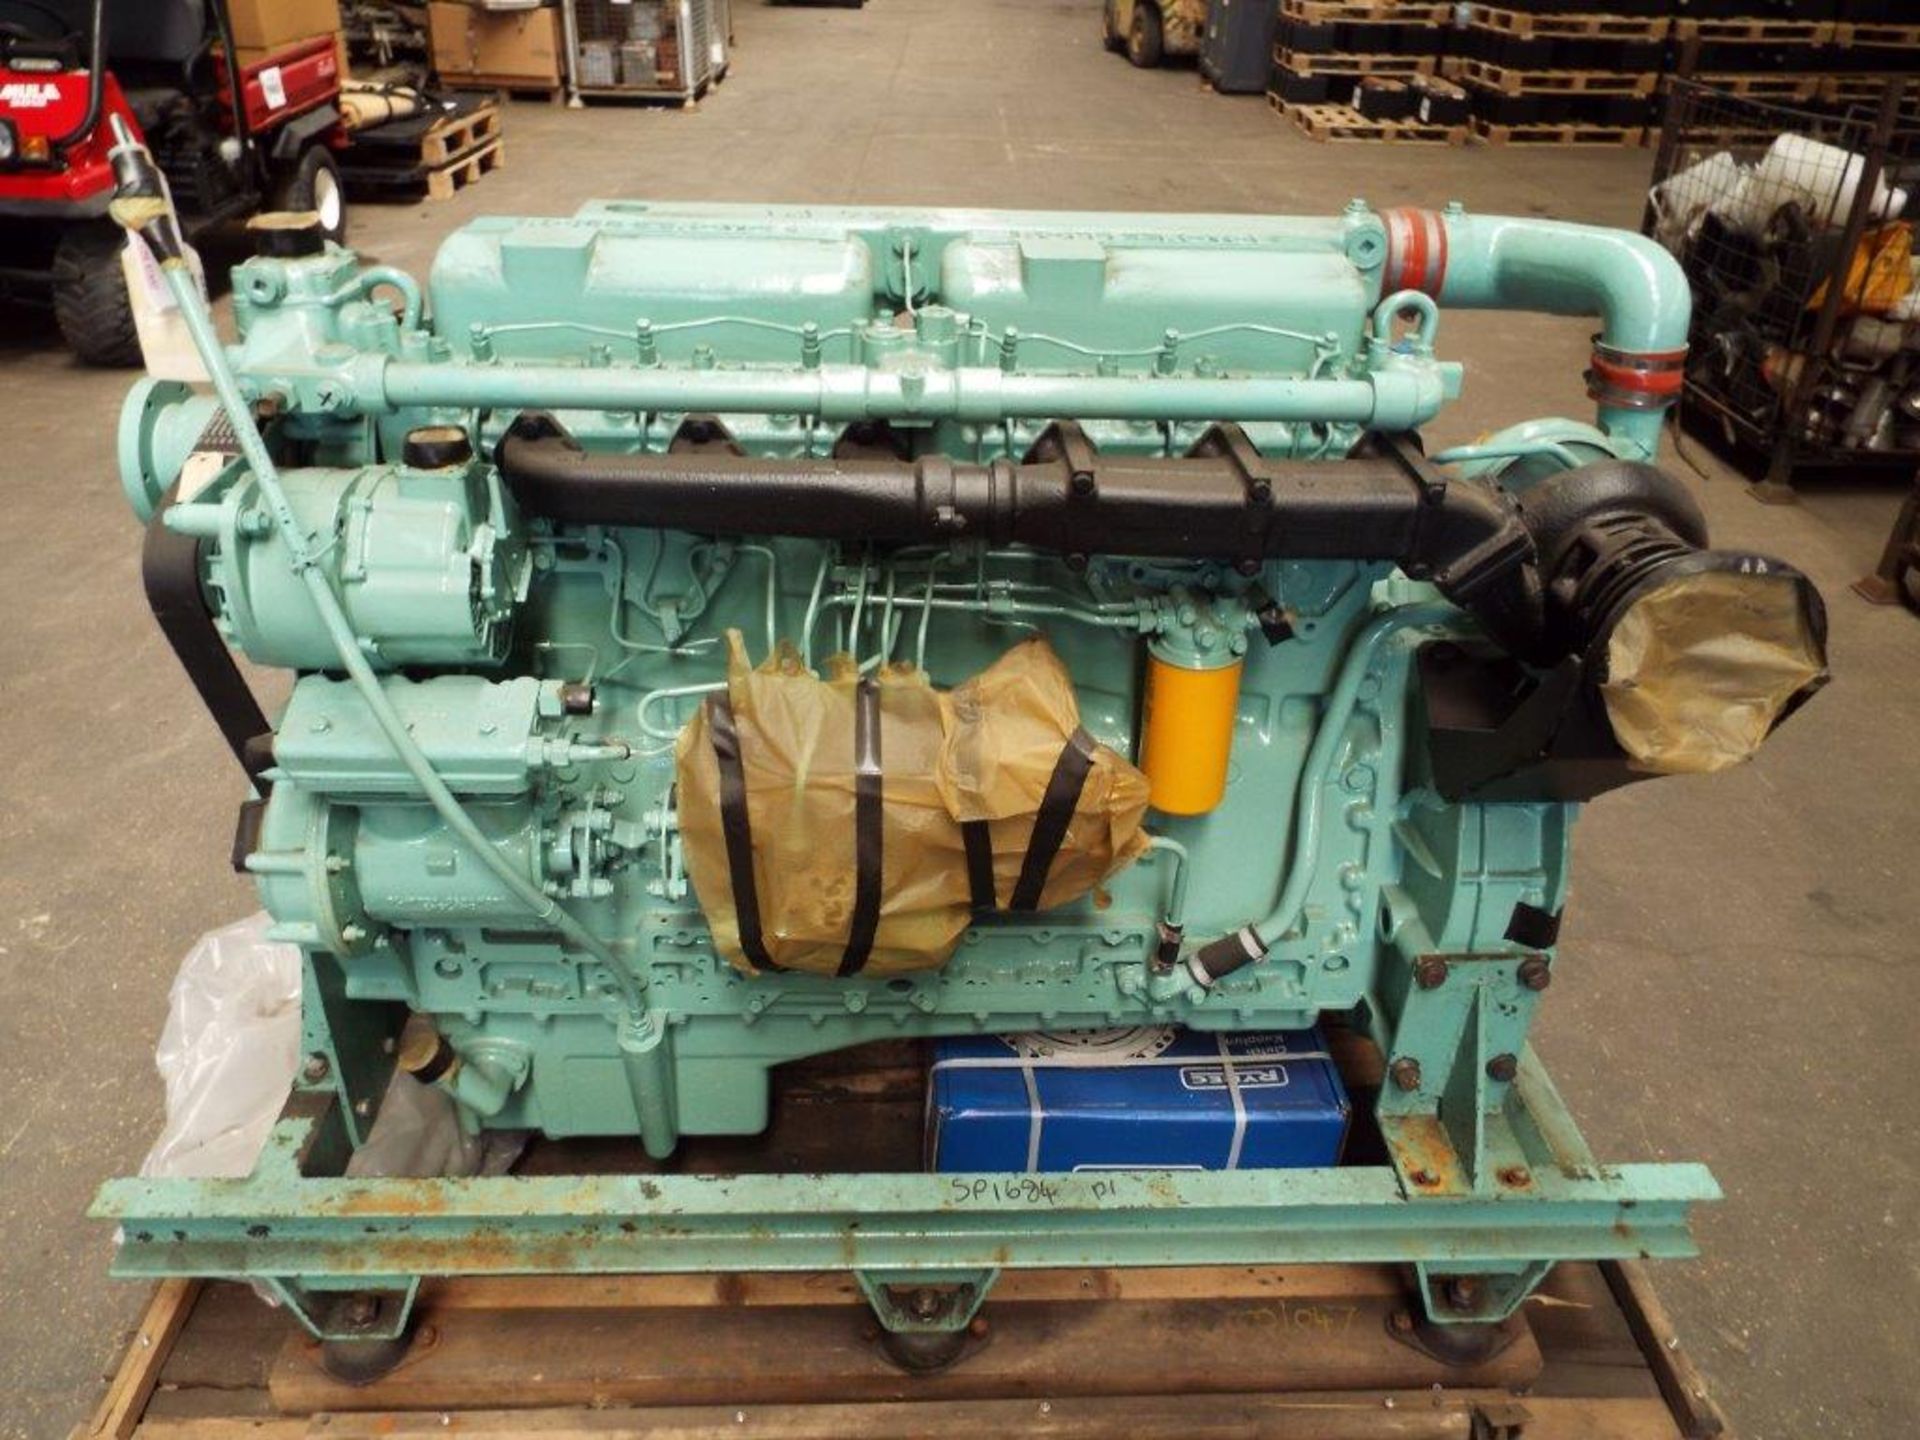 A1 Reconditioned Rolls Royce/Perkins 290L Straight 6 Turbo Diesel Engine for Foden Recovery Vehicles - Image 4 of 20